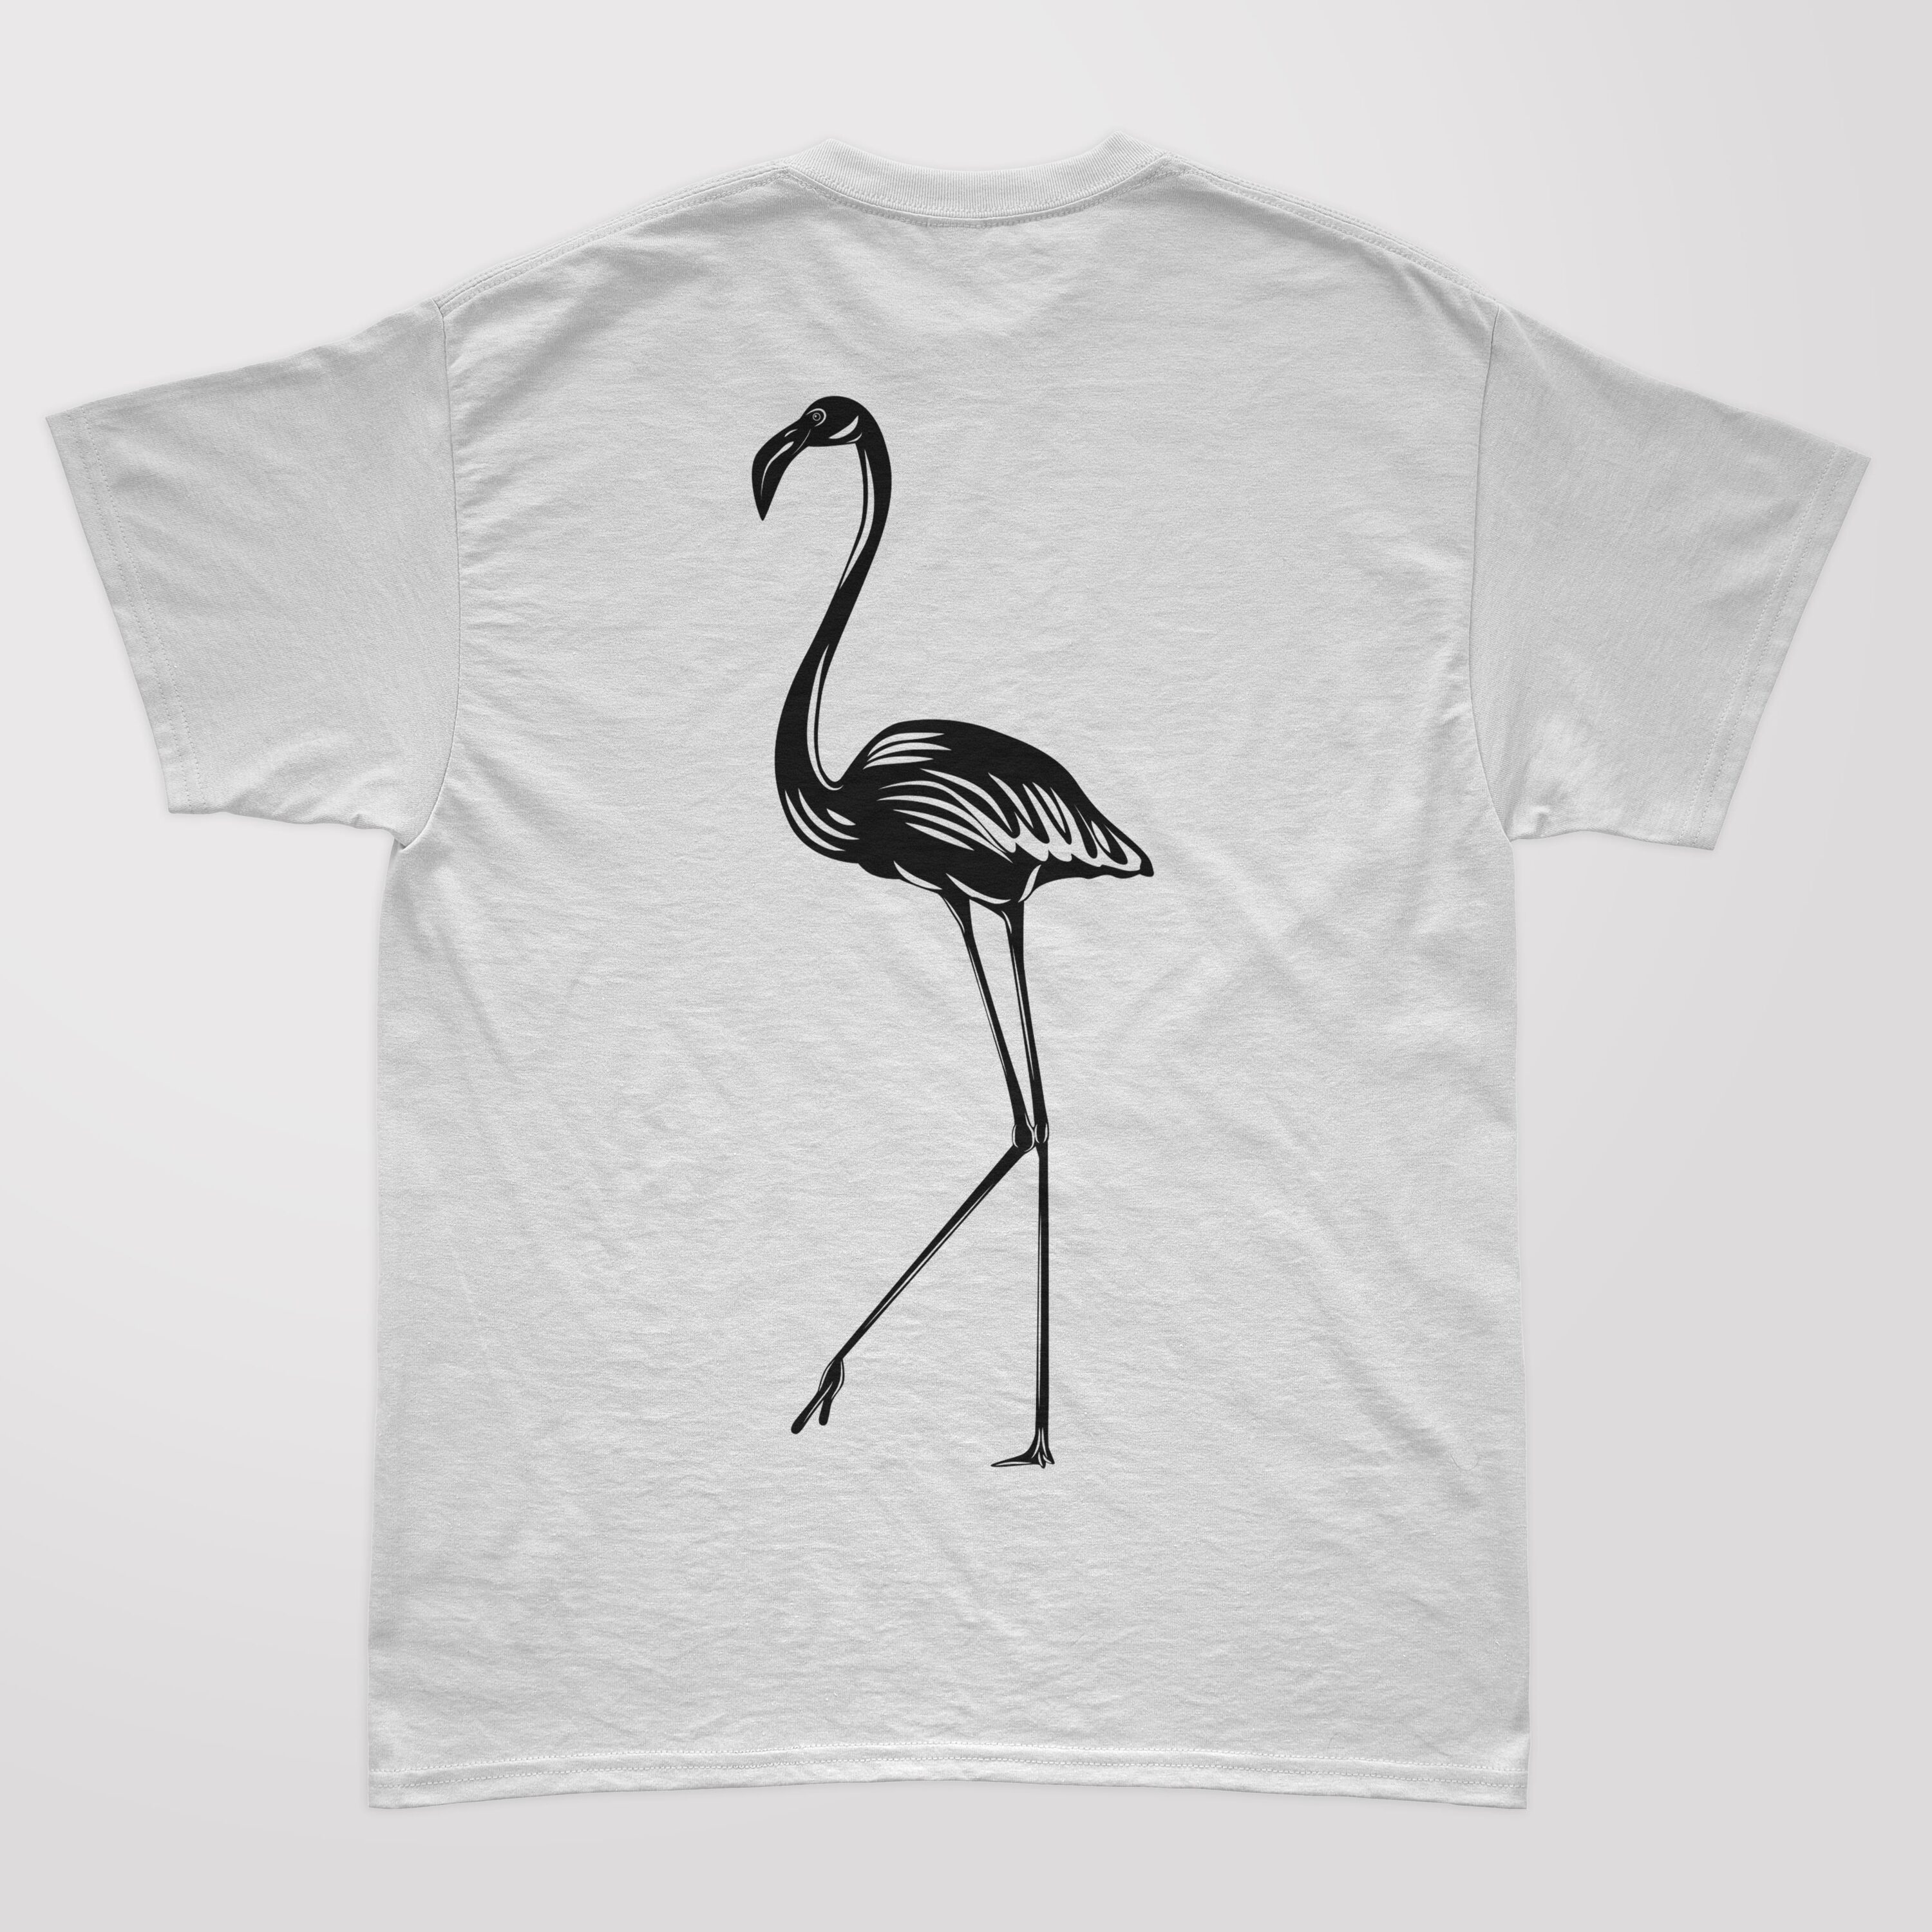 High quality silhouette flamingo on the white t-shirt.